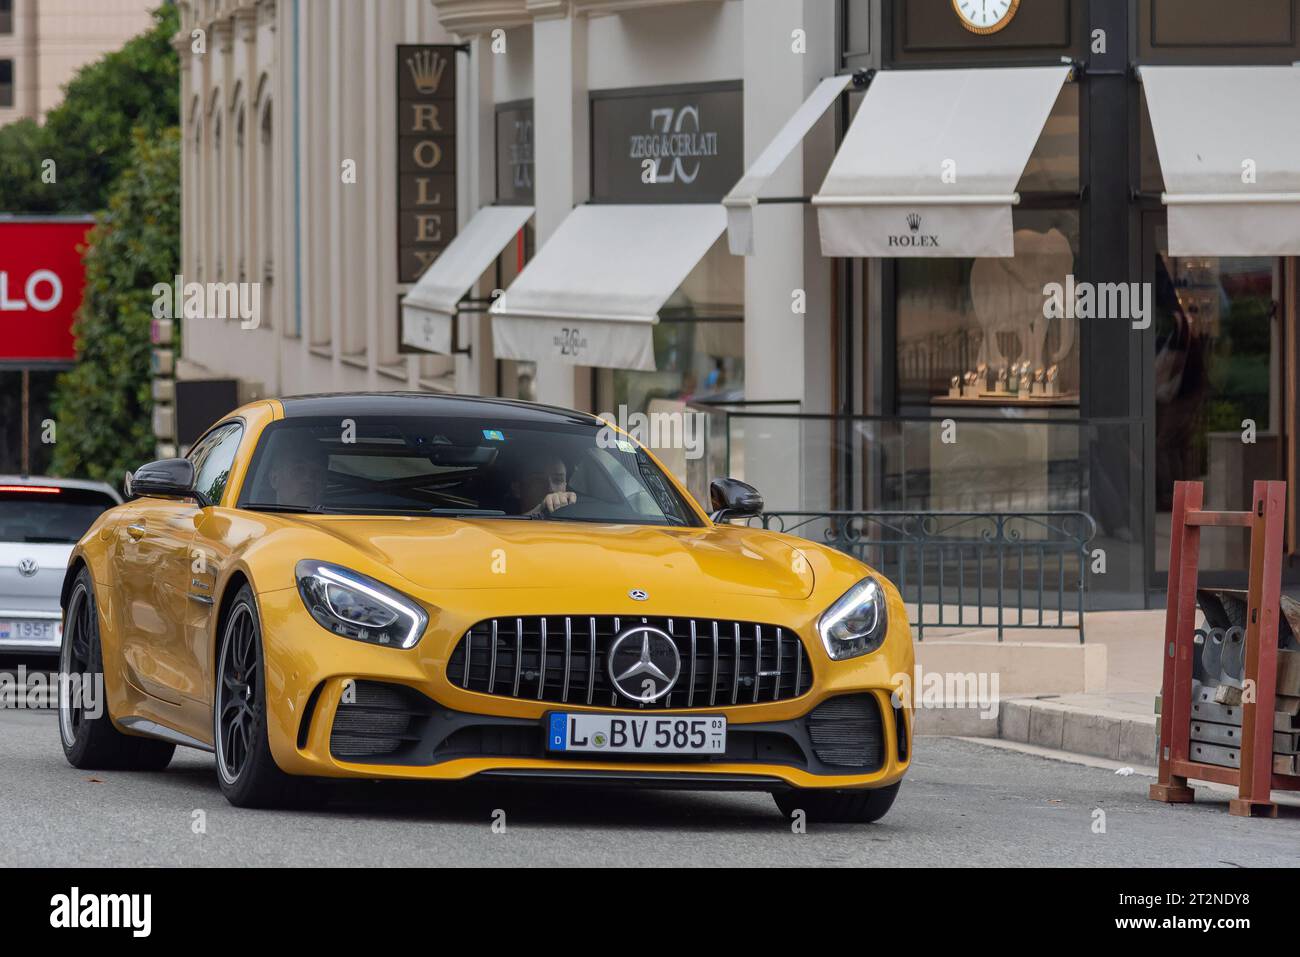 Yellow Mercedes-AMG GT R driving on the road Stock Photo